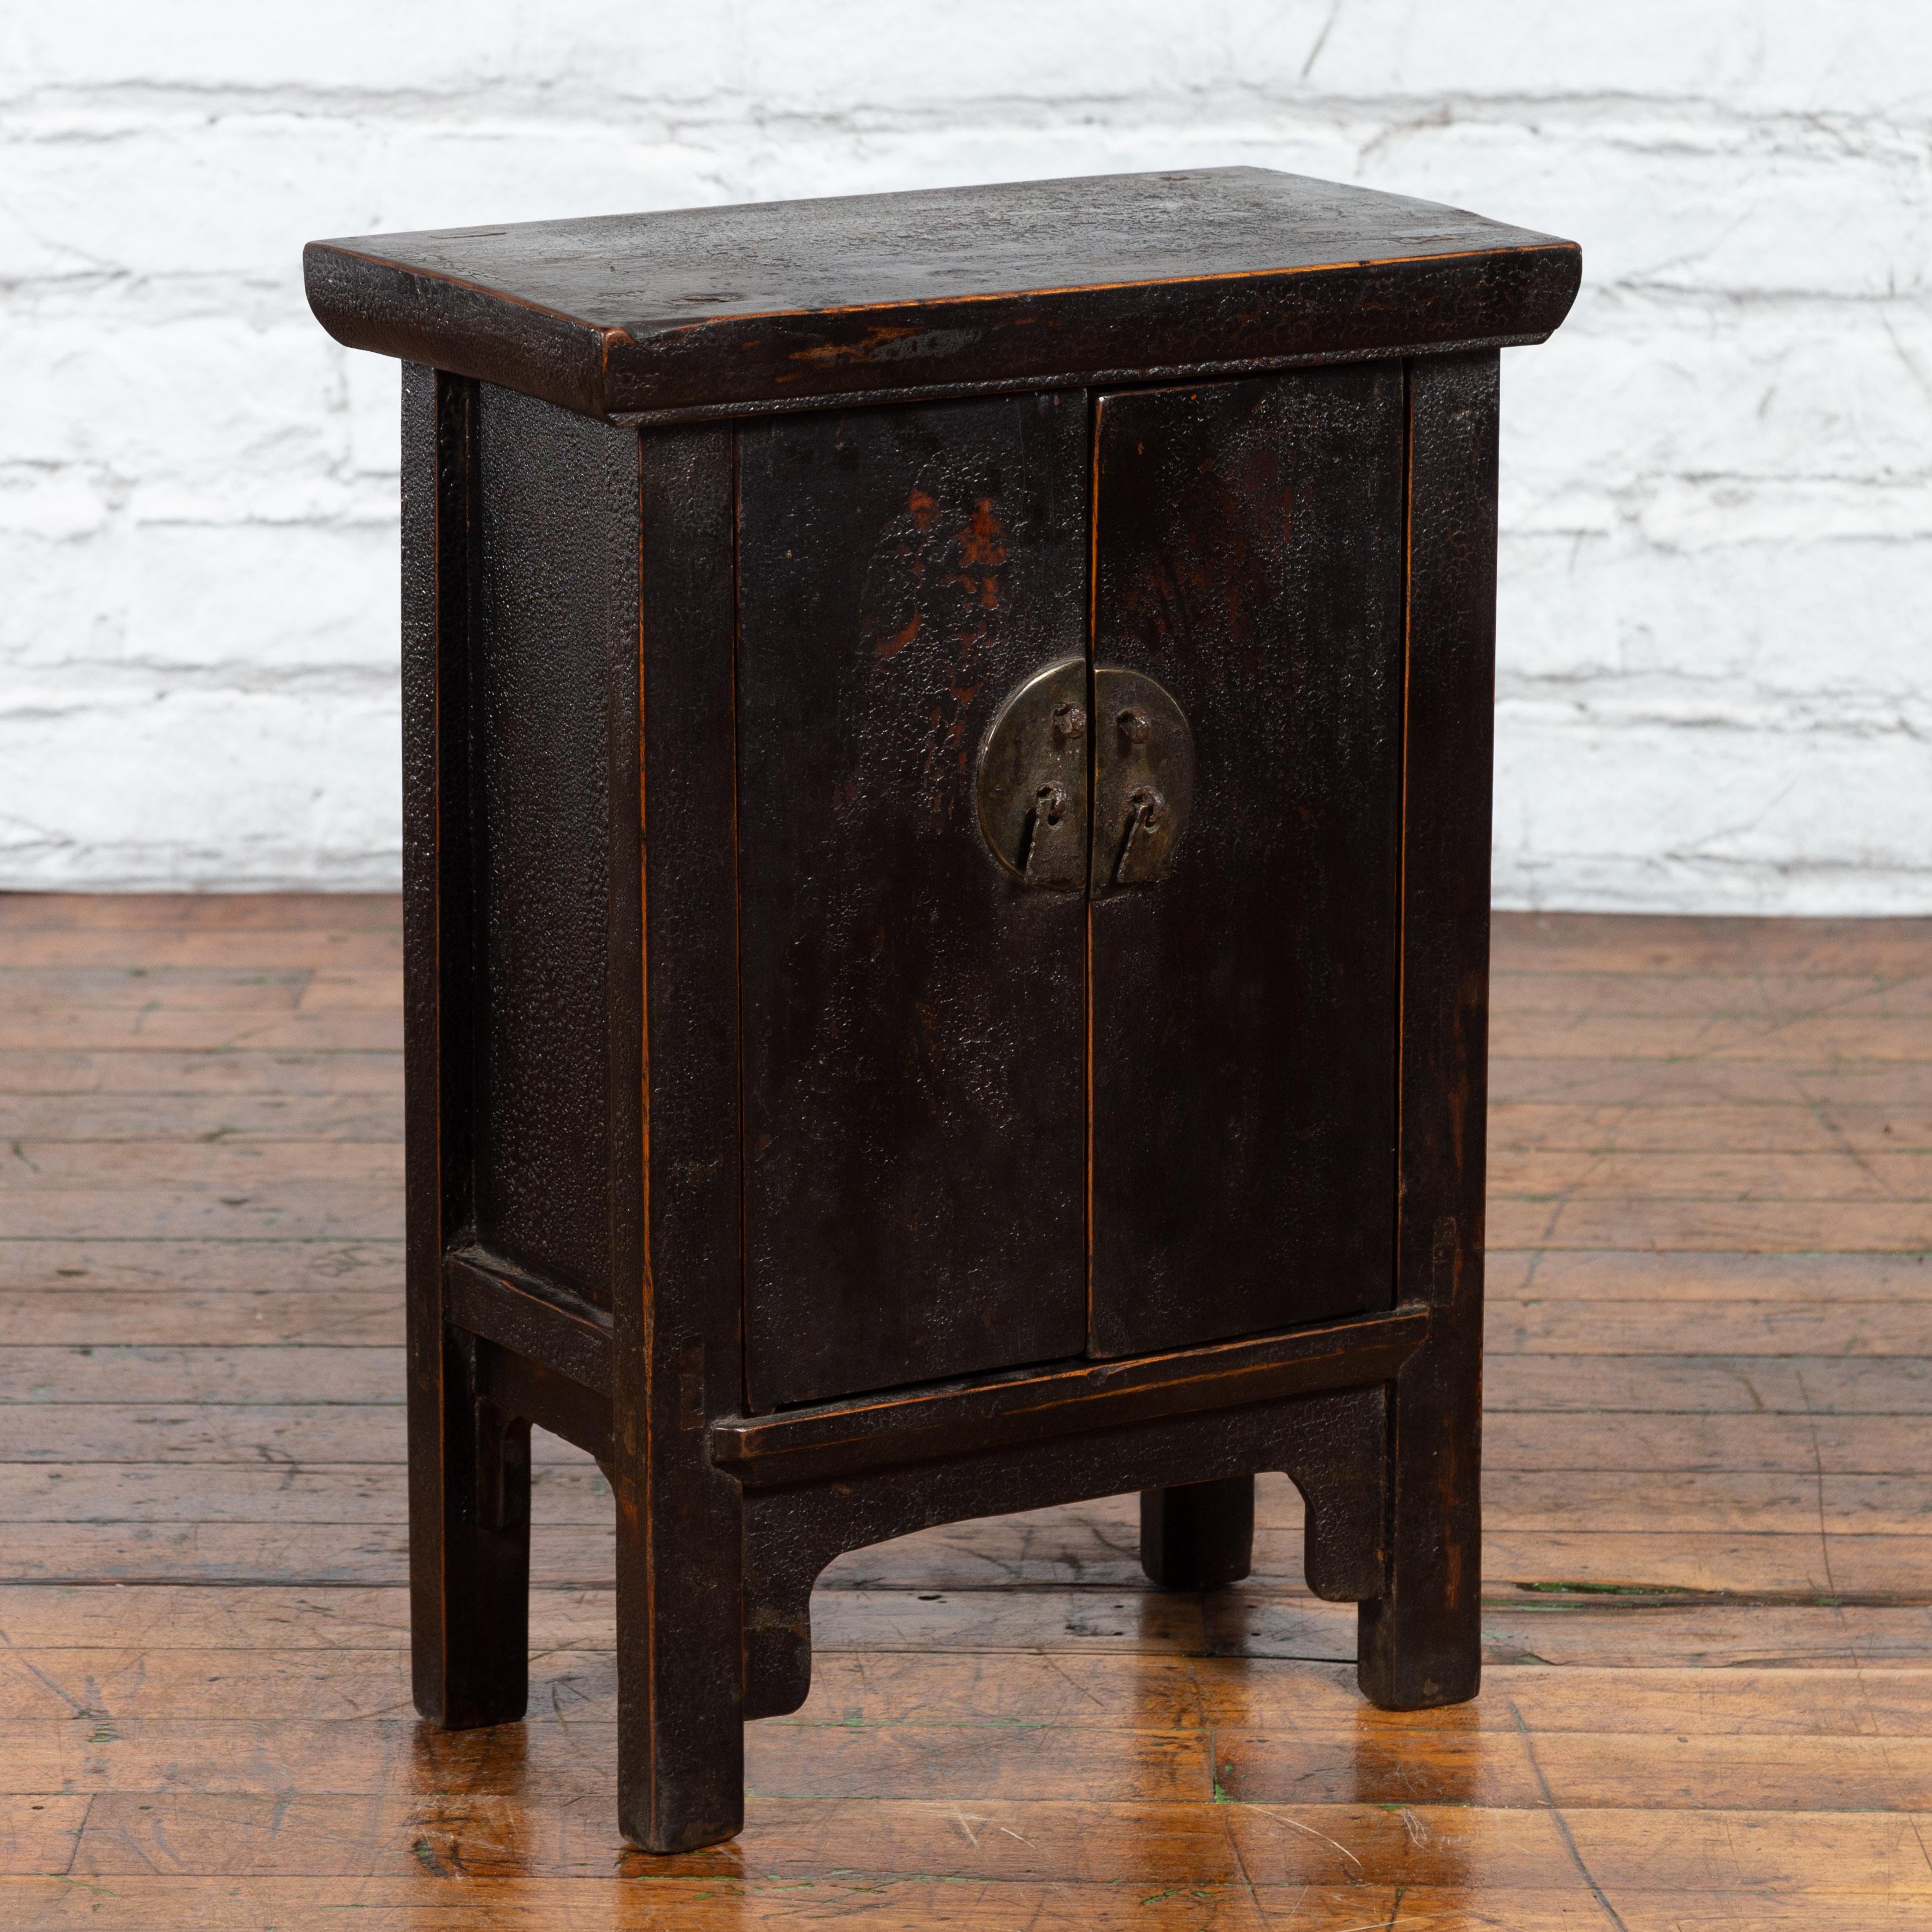 A Chinese Qing Dynasty period side cabinet from the 19th century with double doors, distressed black lacquer and brass hardware. Created in China during the Qing Dynasty in the 19th century, this side cabinet features a rectangular top with slightly